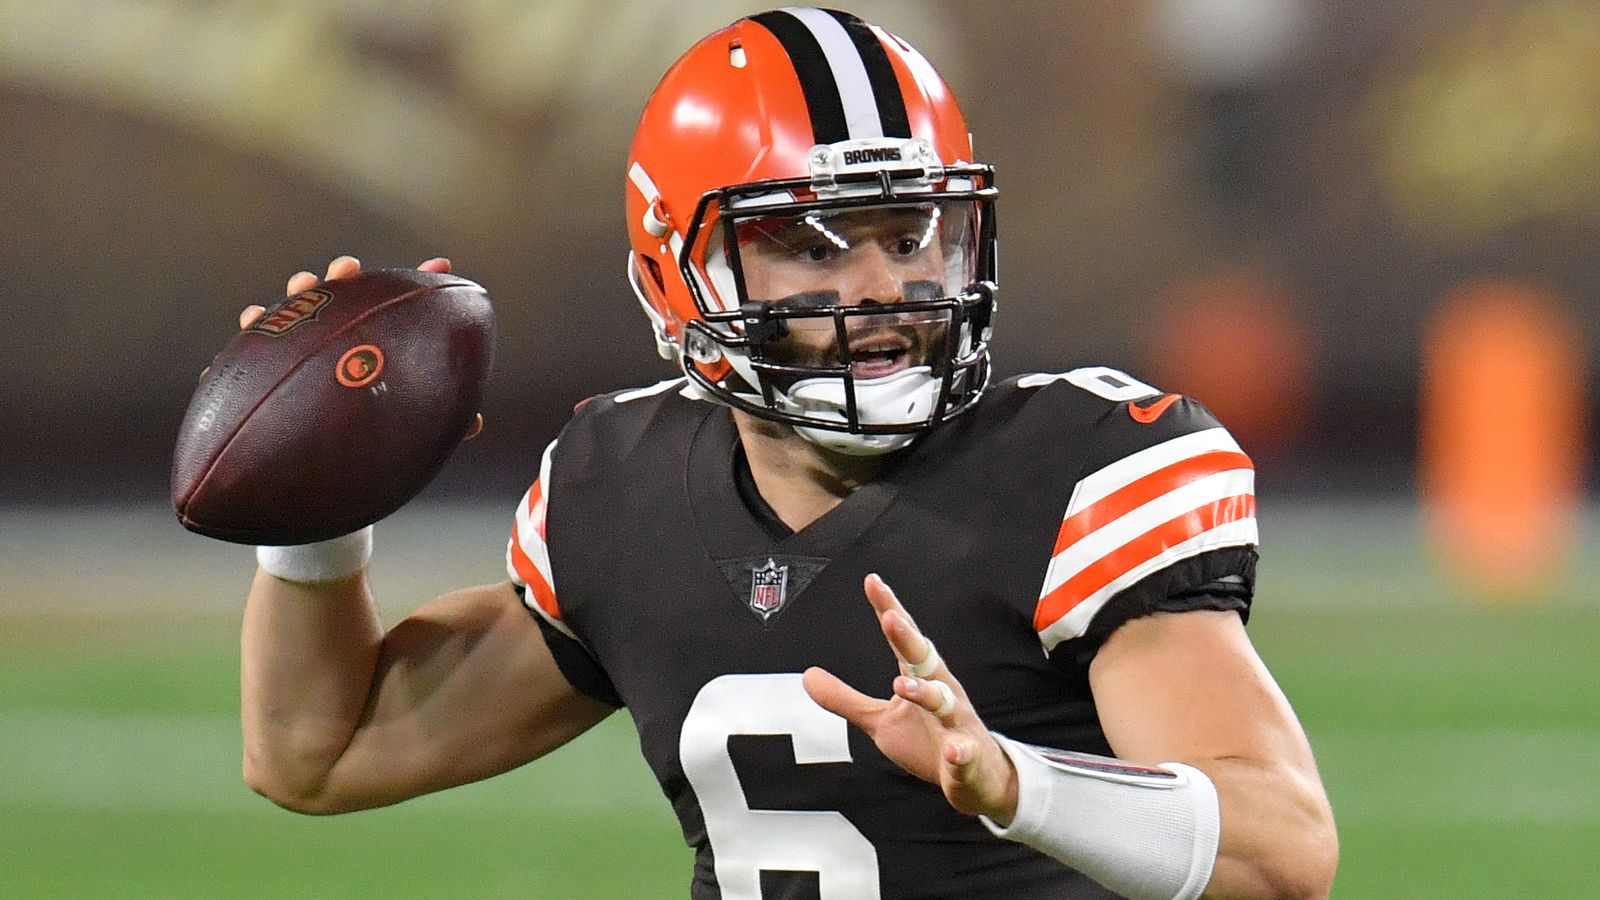 Cincinnati Bengals 30-35 Cleveland Browns: Baker Mayfield throws for two to...